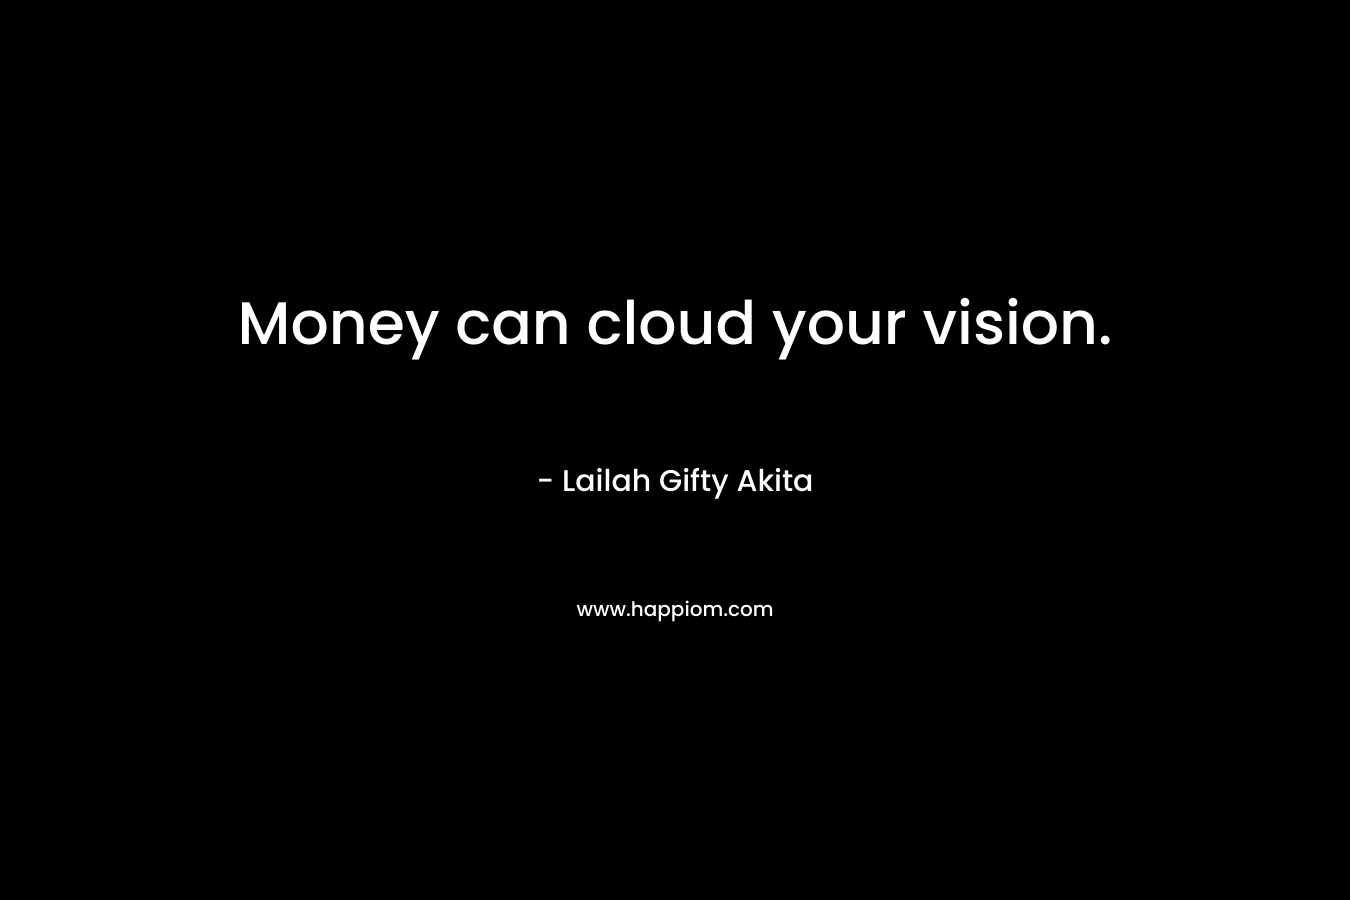 Money can cloud your vision.